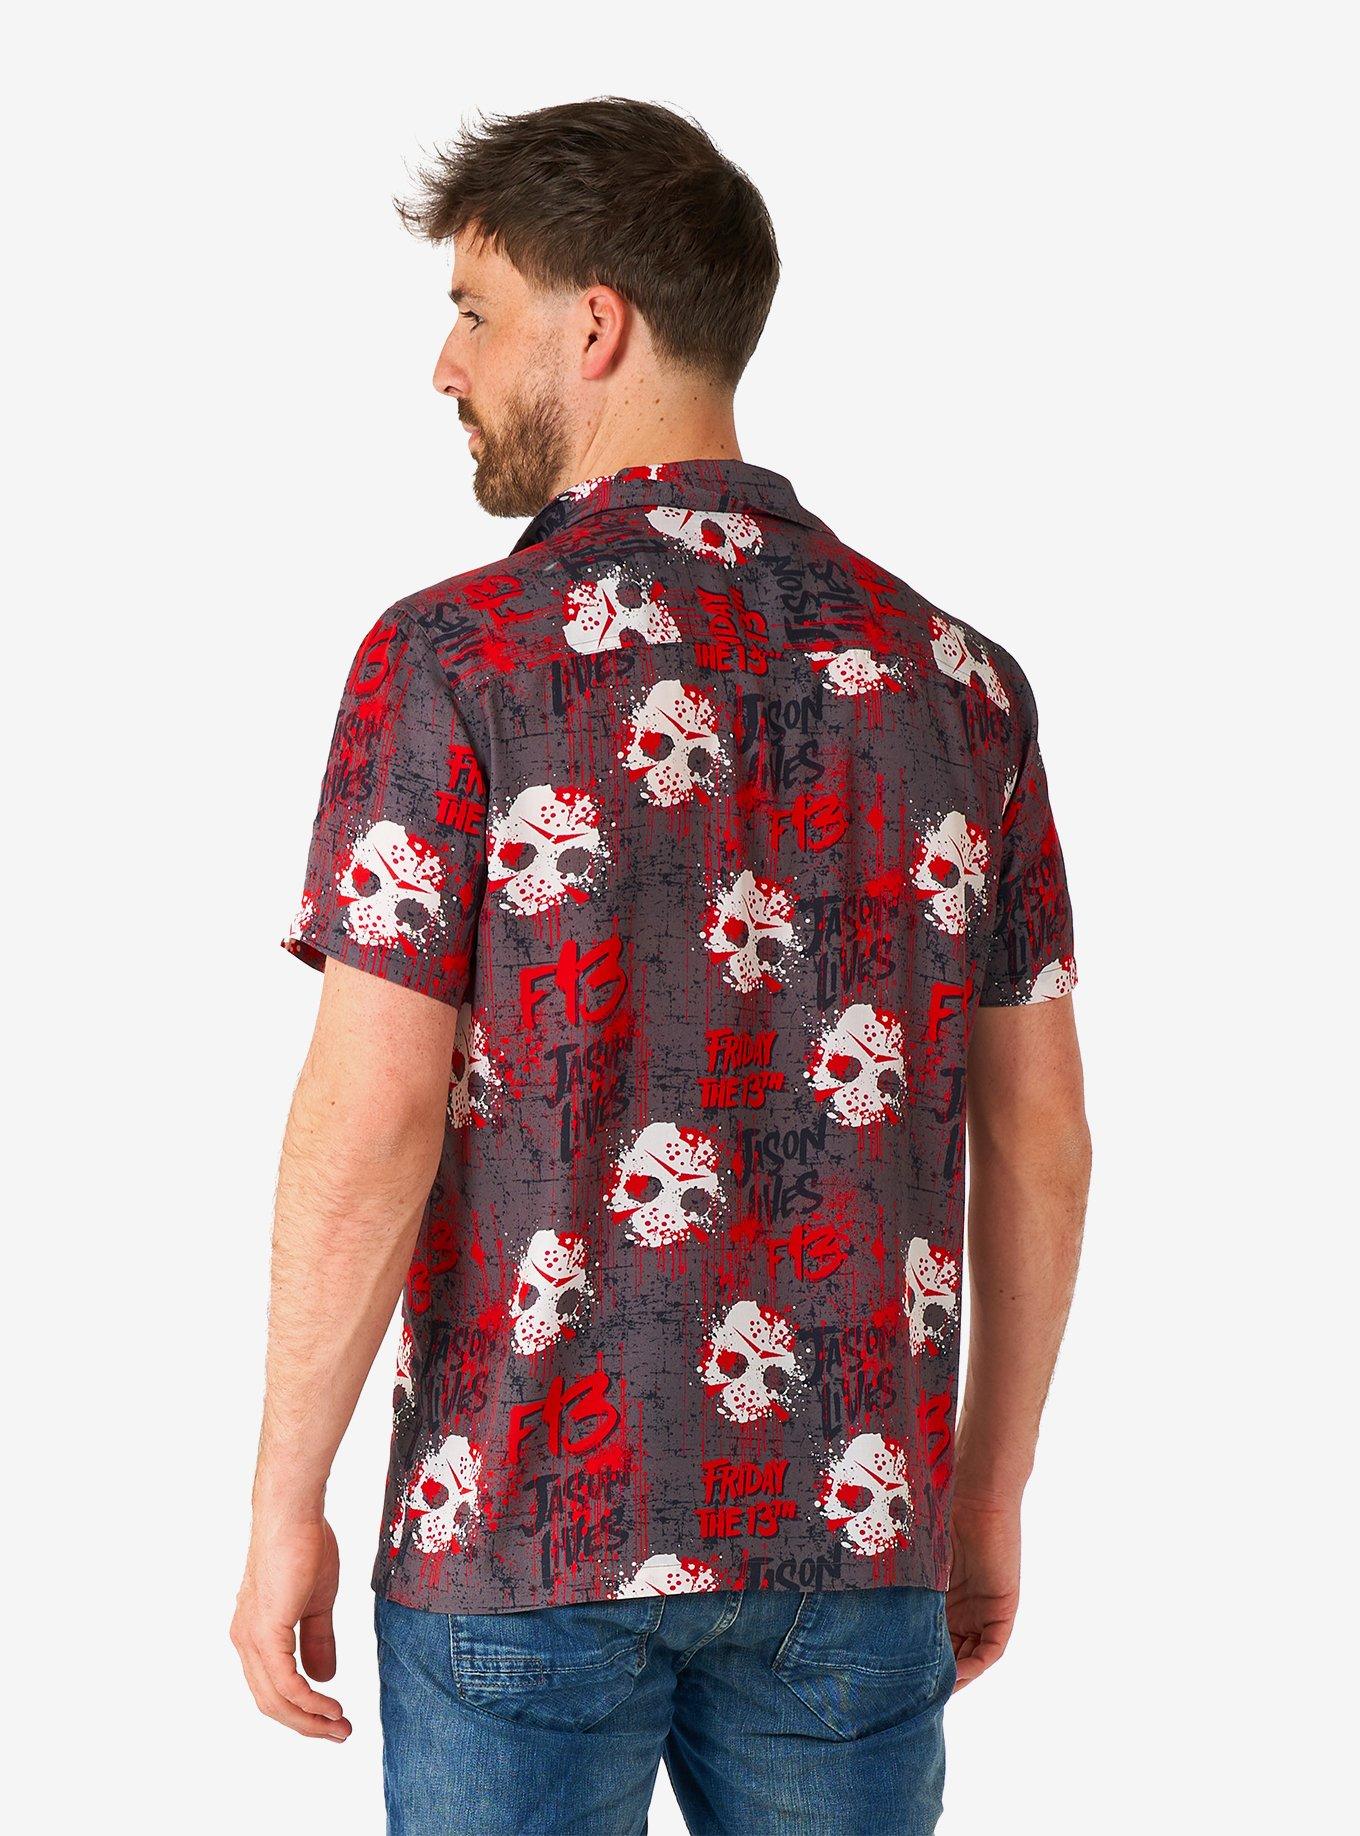 Friday the 13th Short Sleeve Button-Up Shirt